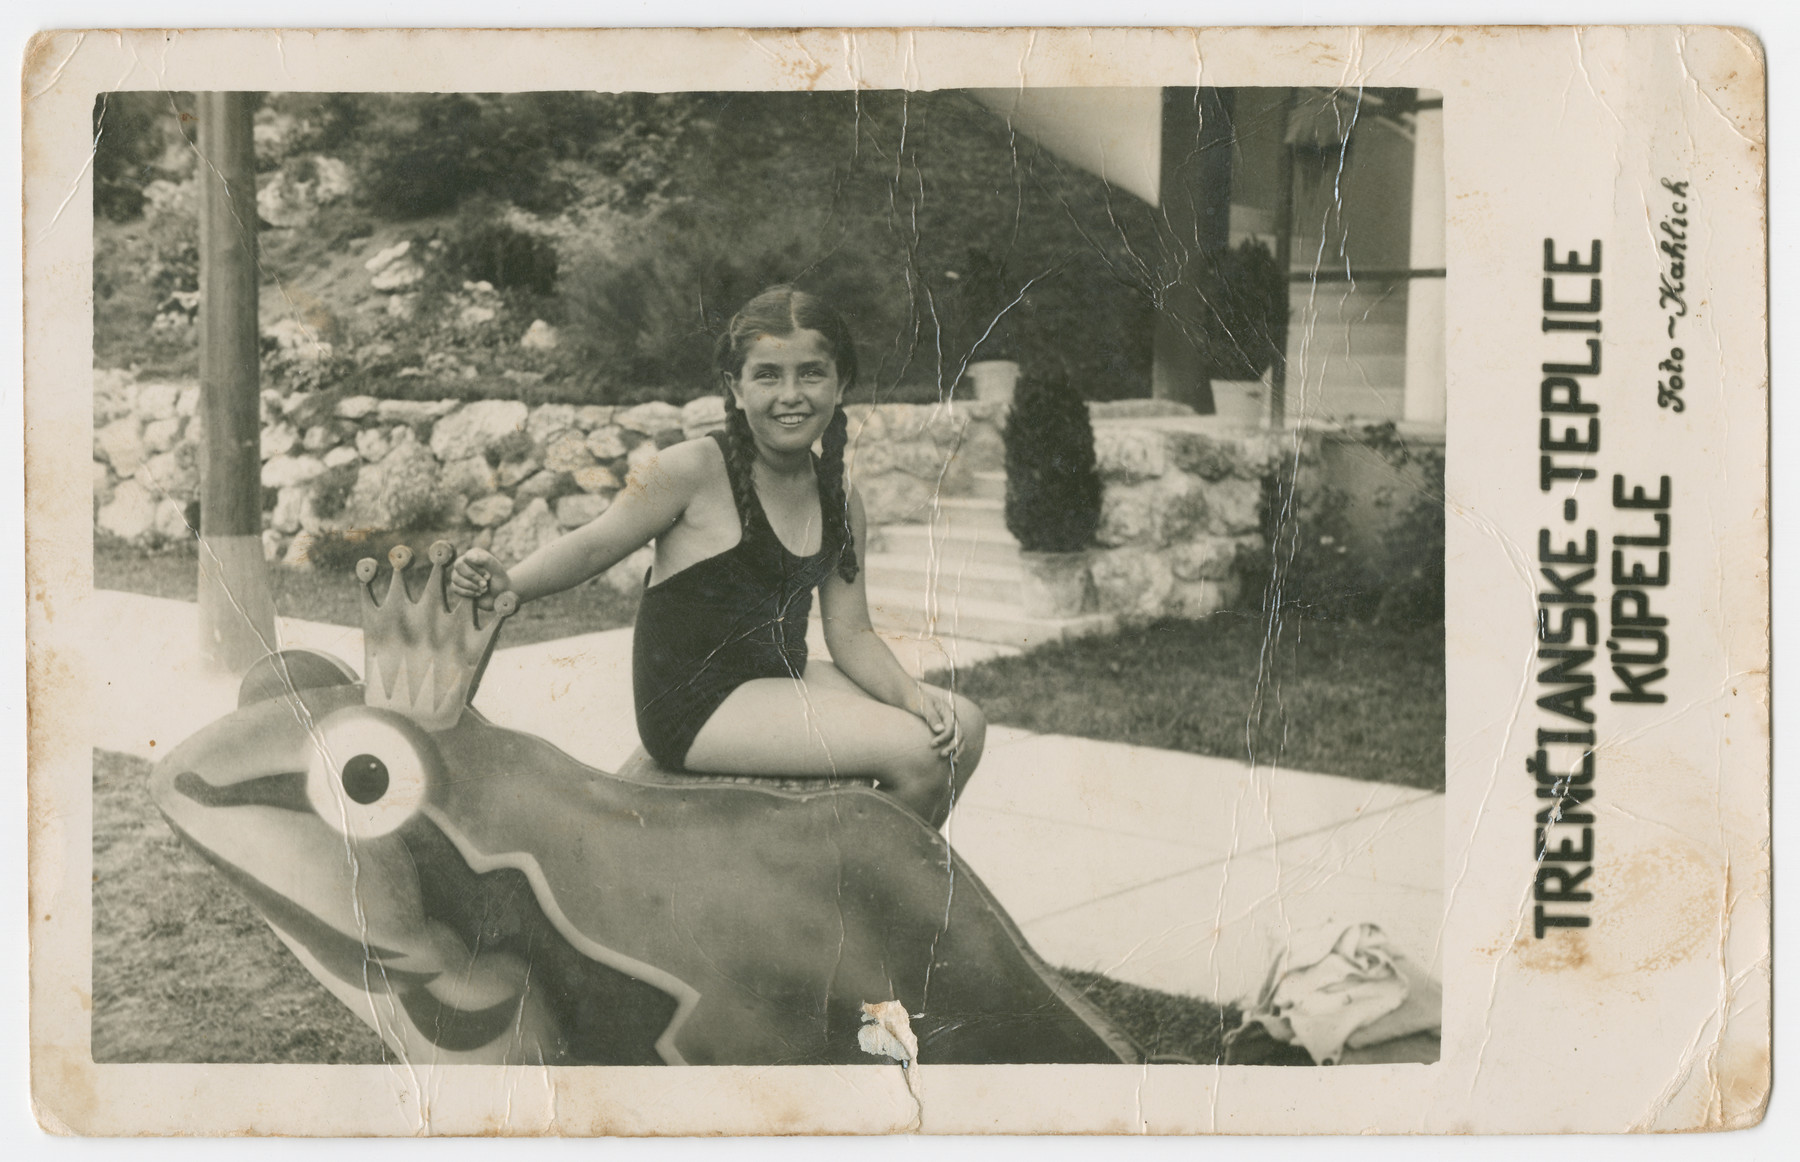 Hanka Wertheimer sits on a frog statue in her bathing suit at a swimming resort.